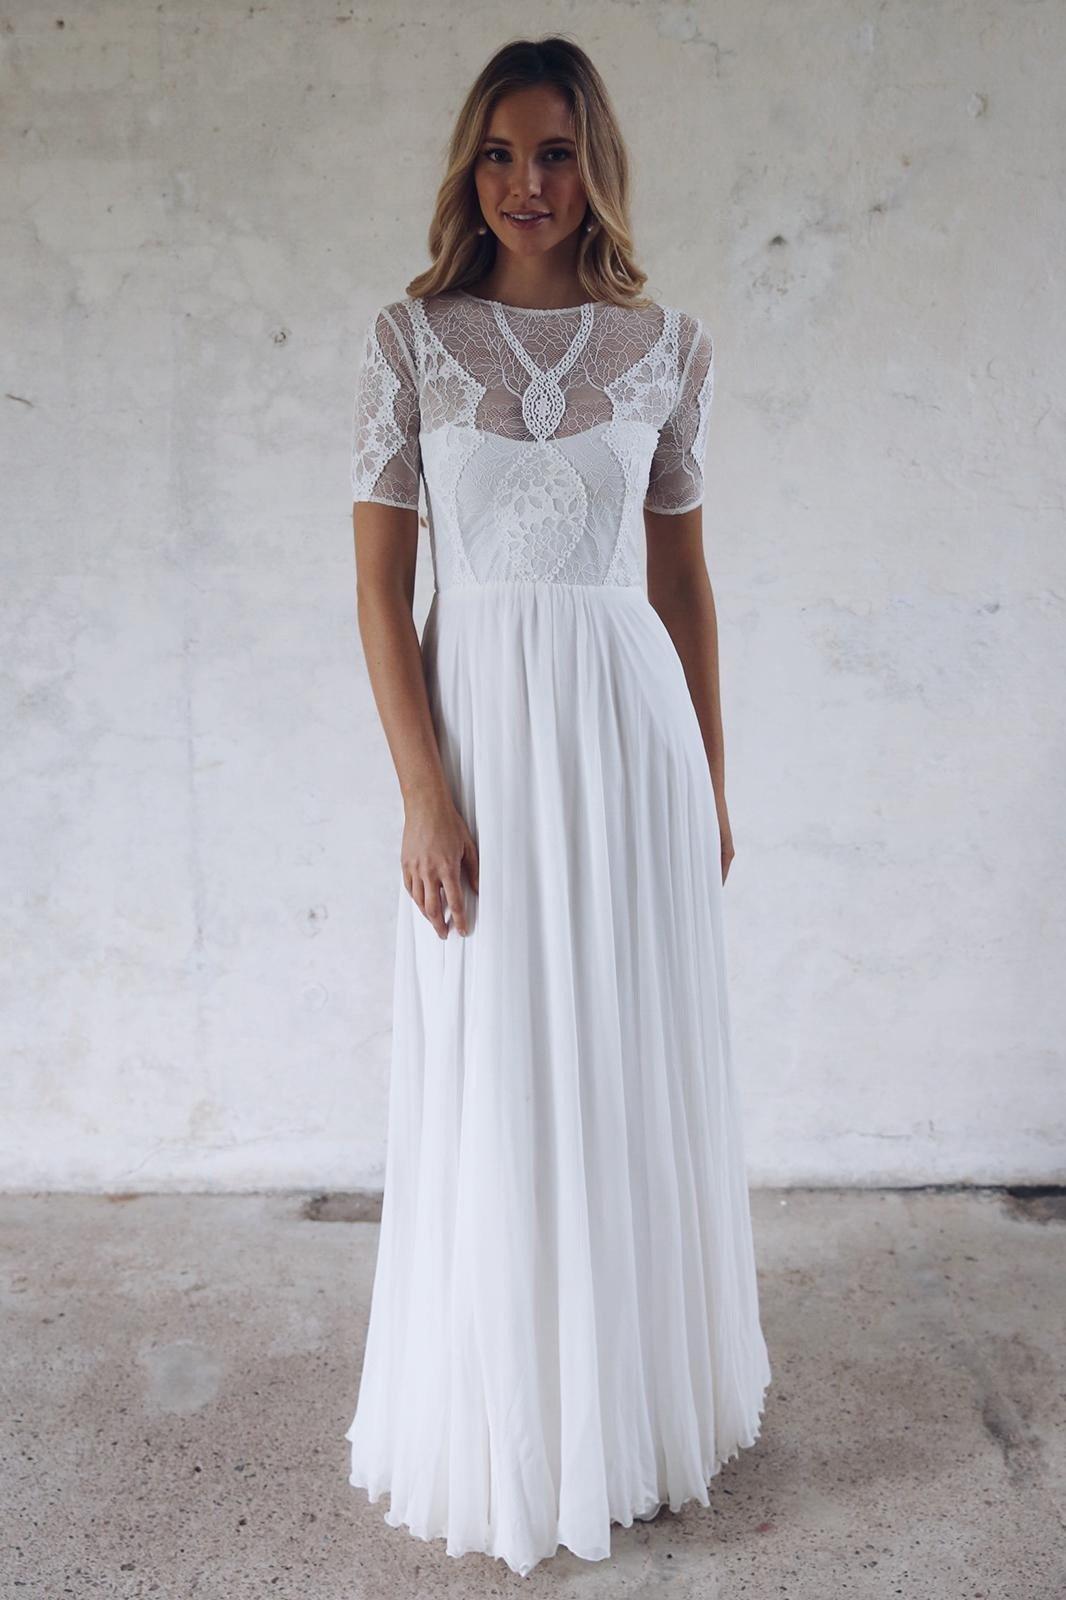 17 Beautiful Vintage-Inspired Wedding Dresses - hitched.co.uk - hitched ...